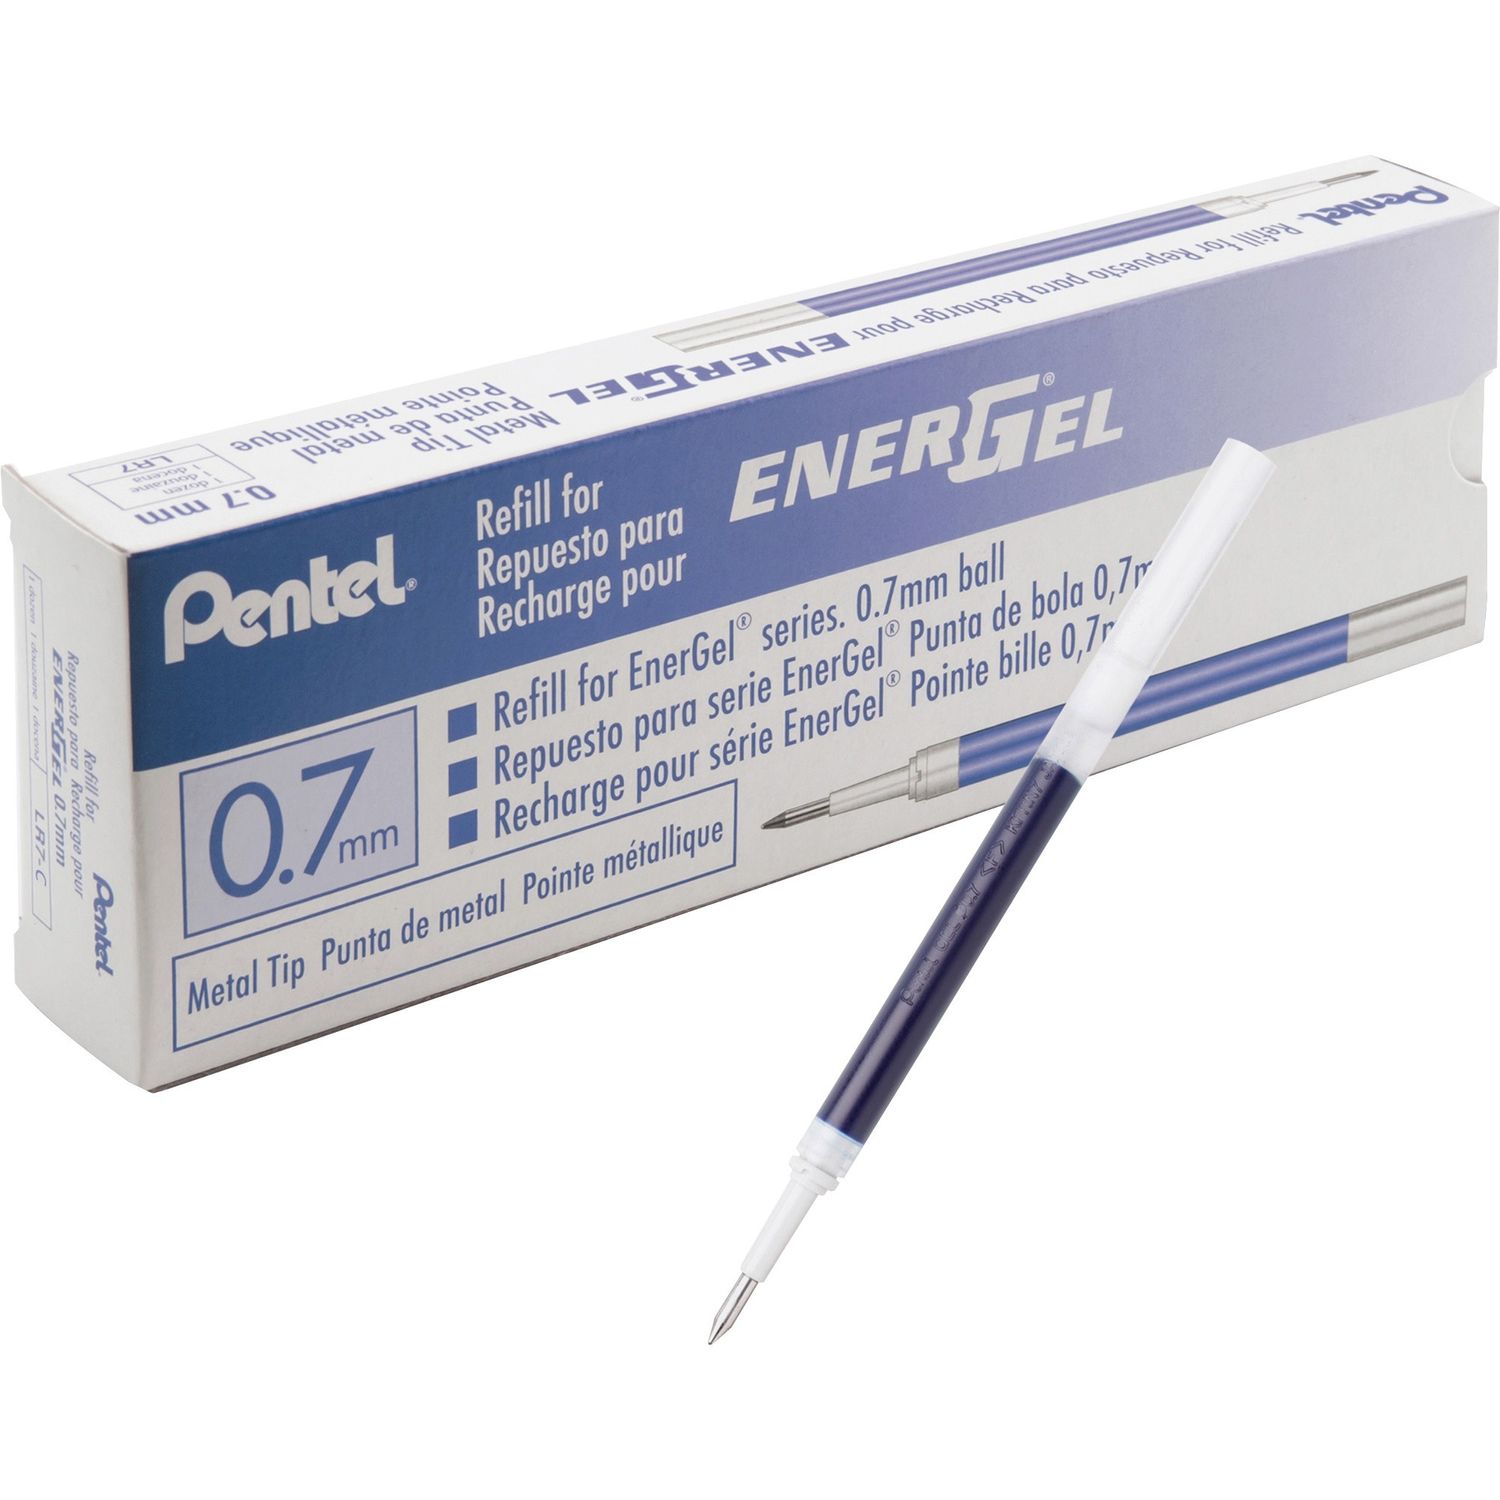 EnerGel .7mm Liquid Gel Pen Refill 0.70 mm, Fine Point, Blue Ink, Smudge Proof, Smear Proof, Quick-drying Ink, Glob-free, Smooth Writing, 12 / Box